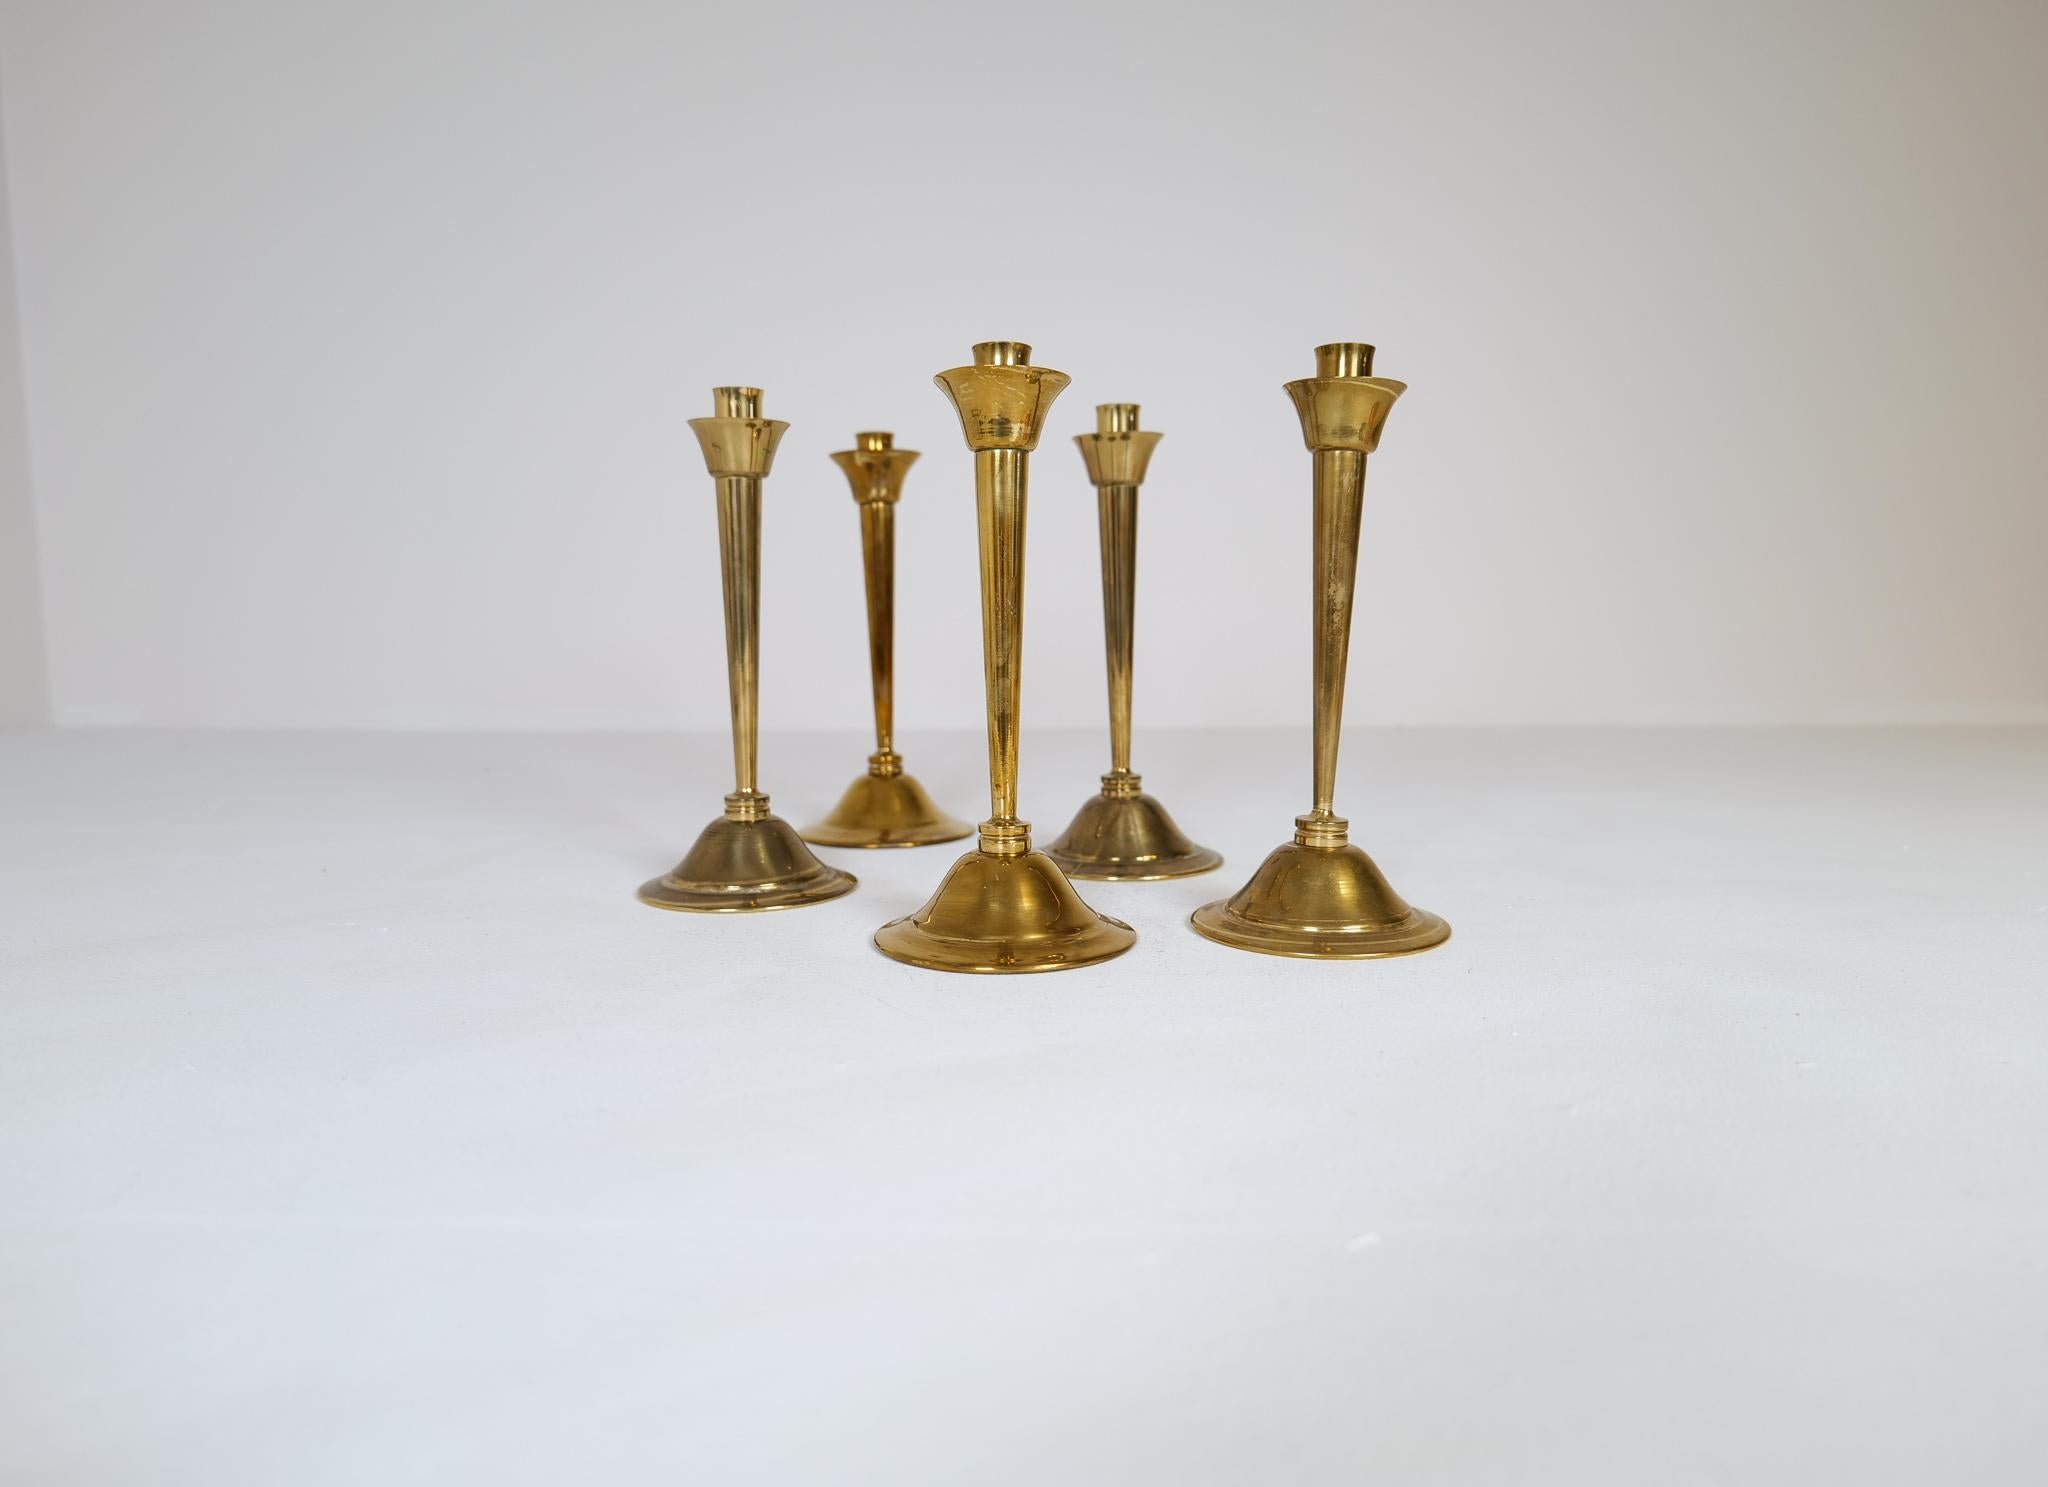 Set of 3 brass candlesticks designed by Lars Holmström. Produced by Lars Holmström in Arvika, Sweden. All of them are signed. Wonderfully worked in the shaped and handmade brass pieces. 

Signs of wear and use. 

Dimensions: Height 21 cm Base 11